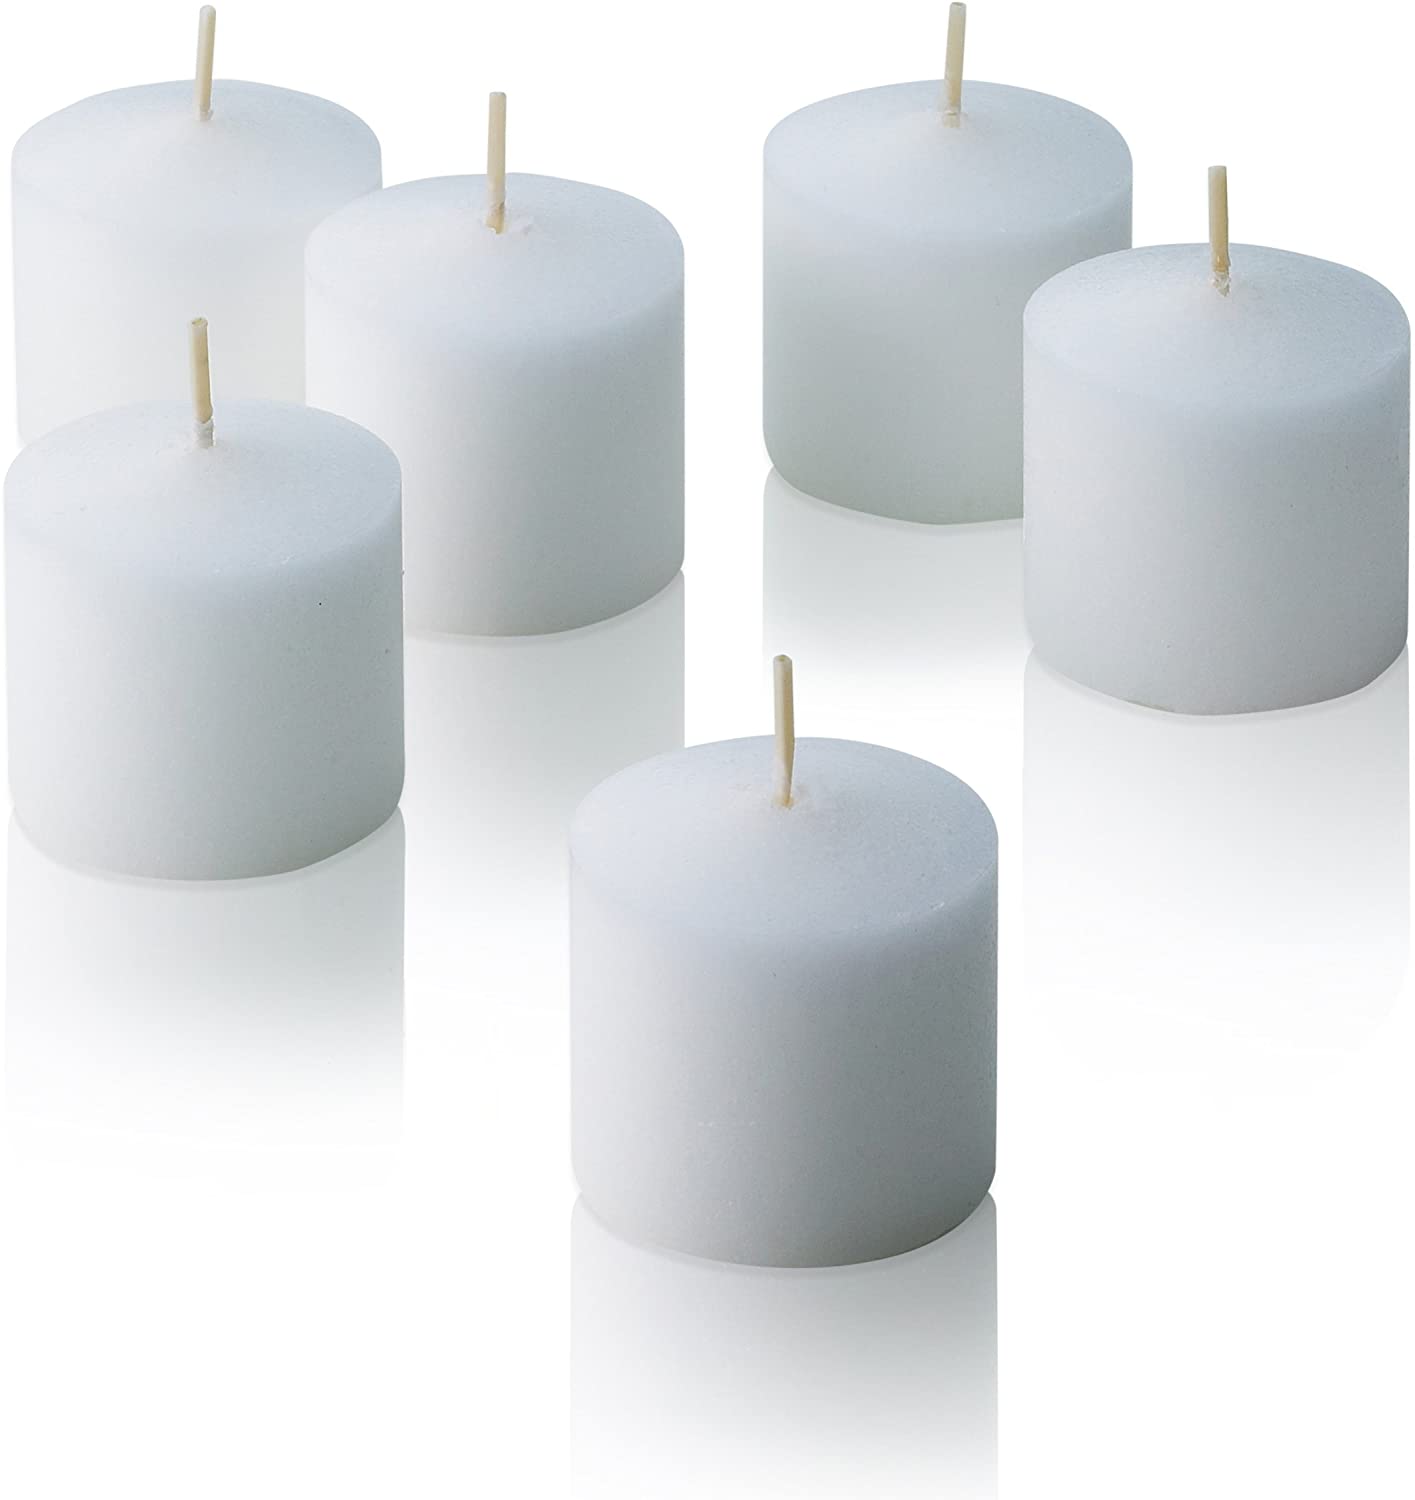 Wax Votive Candles 8 Hours Burning Unscented Ideal for Birthday Aromatherapy Party Candle Gardens & Home Décor (Set of 12, White)